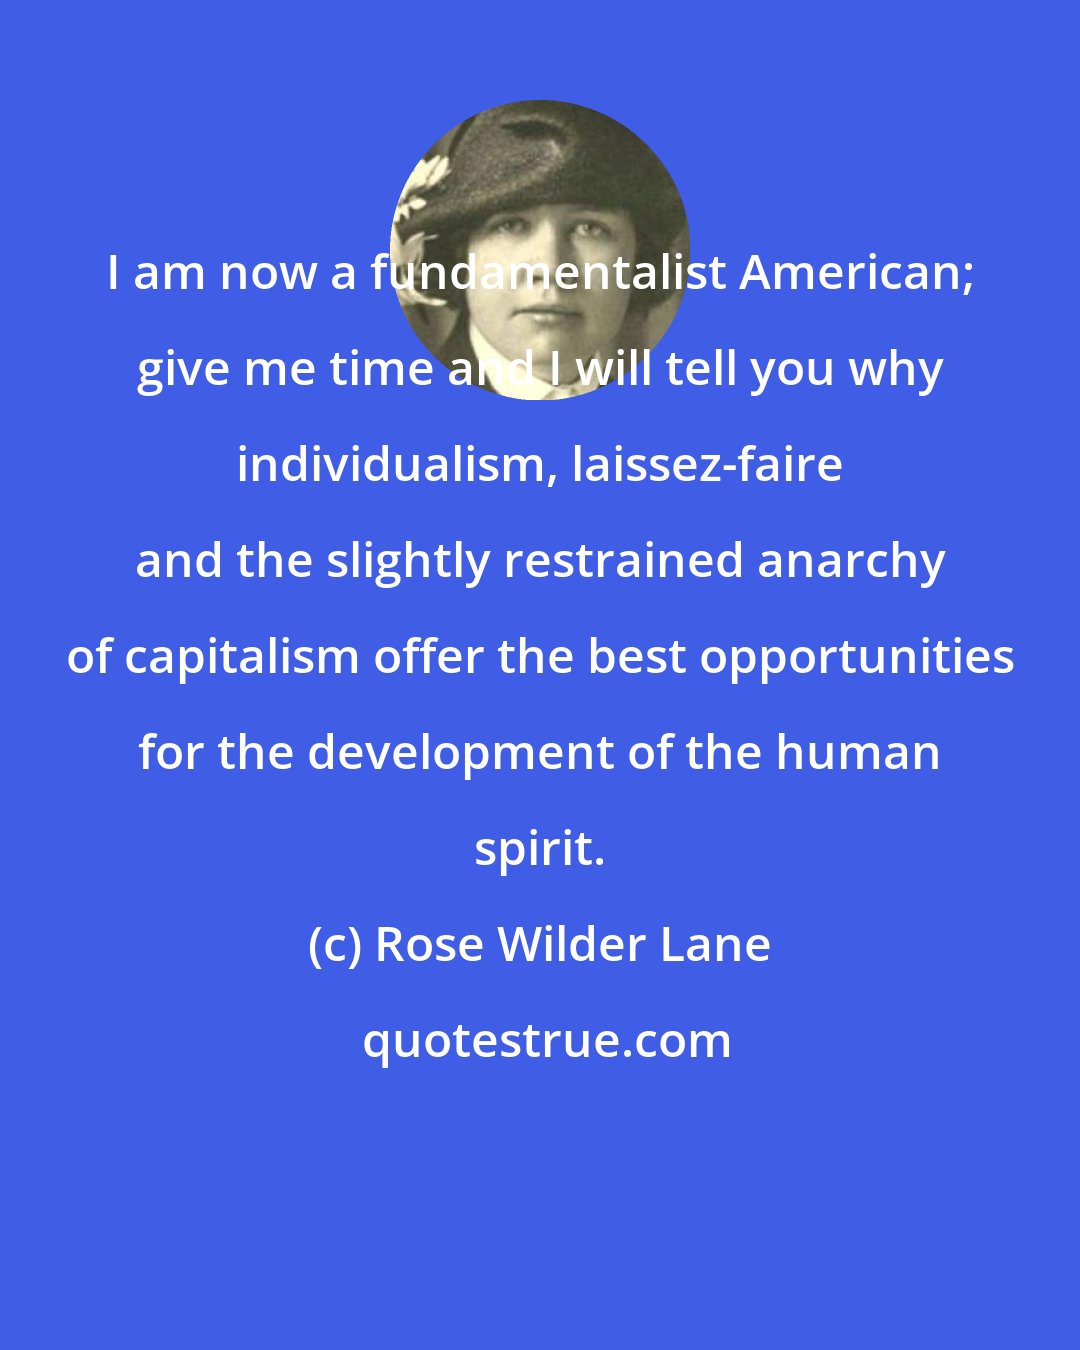 Rose Wilder Lane: I am now a fundamentalist American; give me time and I will tell you why individualism, laissez-faire and the slightly restrained anarchy of capitalism offer the best opportunities for the development of the human spirit.